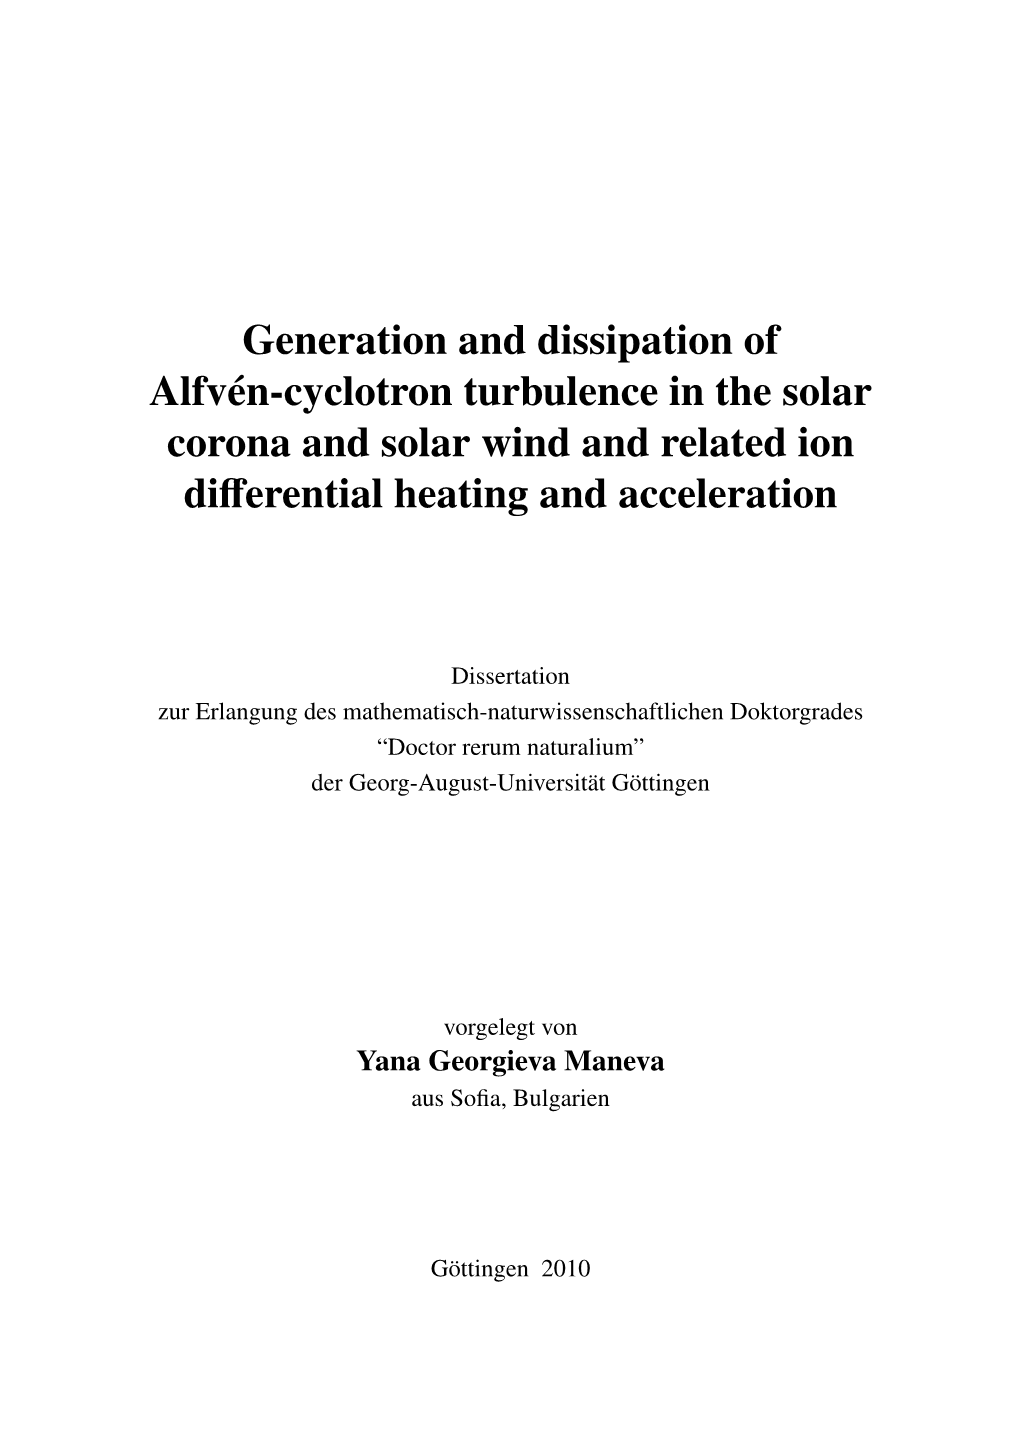 Generation and Dissipation of Alfvén-Cyclotron Turbulence in the Solar Corona and Solar Wind and Related Ion Diﬀerential Heating and Acceleration